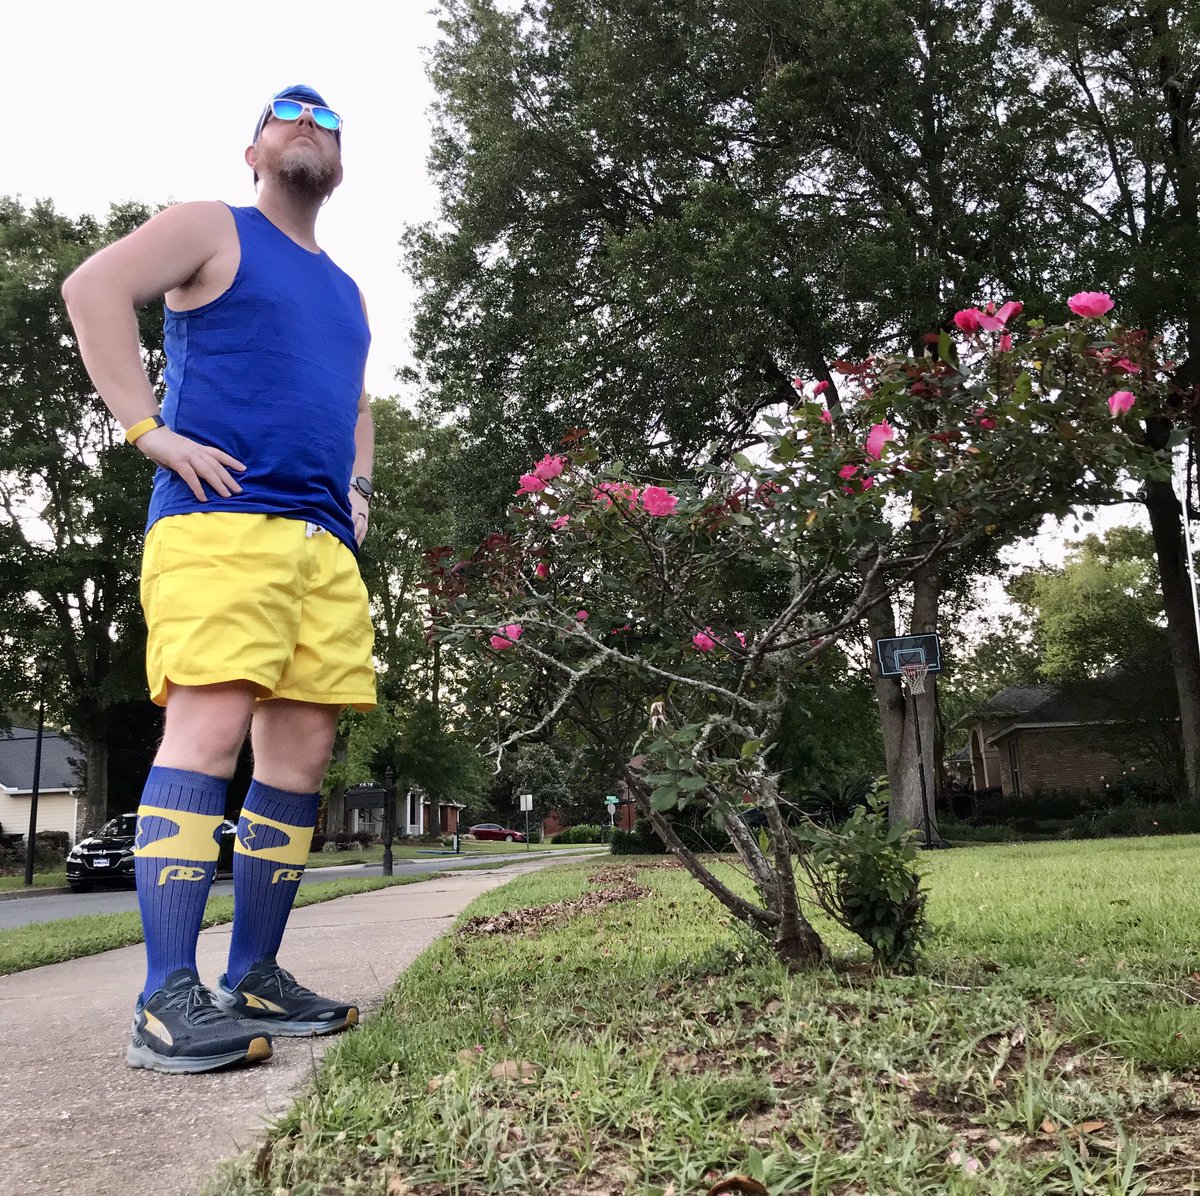 Sometimes all you can do is support, & often that’s all that’s really needed. For #ChipsRun. 

4 miles.❤️💙💛

#IStandWithYou #Fitness #teamnuun #HSHive #PROAlumni #SquirrelsNutButter #shokzstar #shokzquad #TeamROADiD #TeamULTRA #LeagueOfGarmin #RunChat #WeRunSocial #IHeartTally